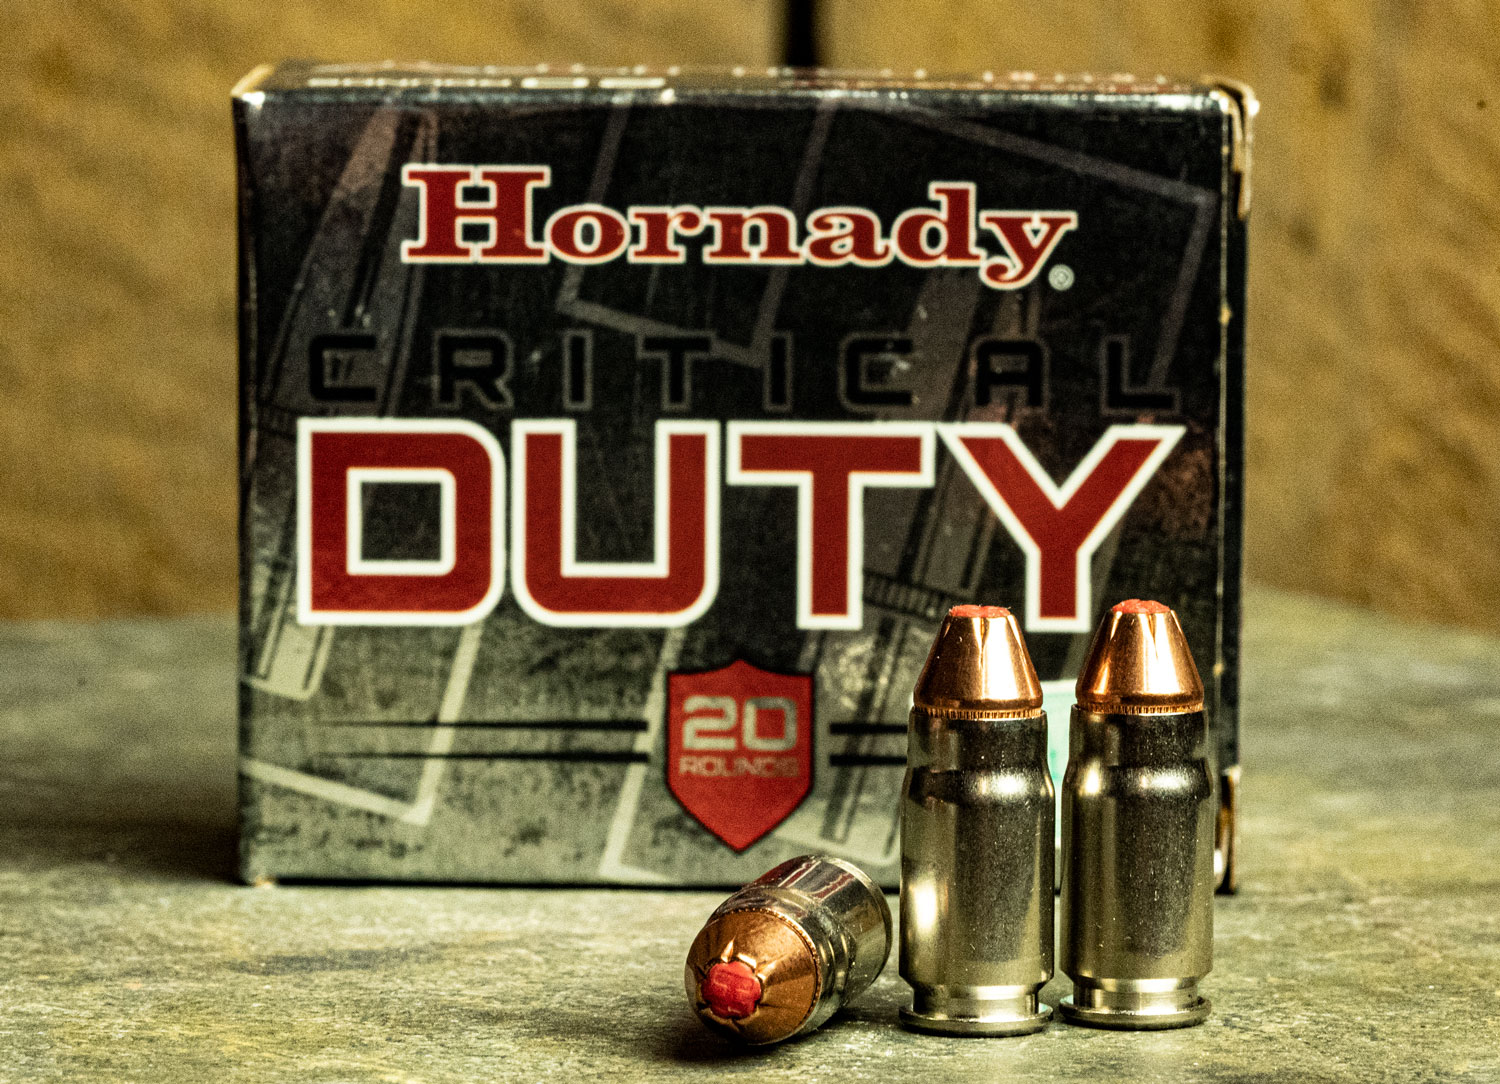 Hornady ammo with plastic tips in the bullet